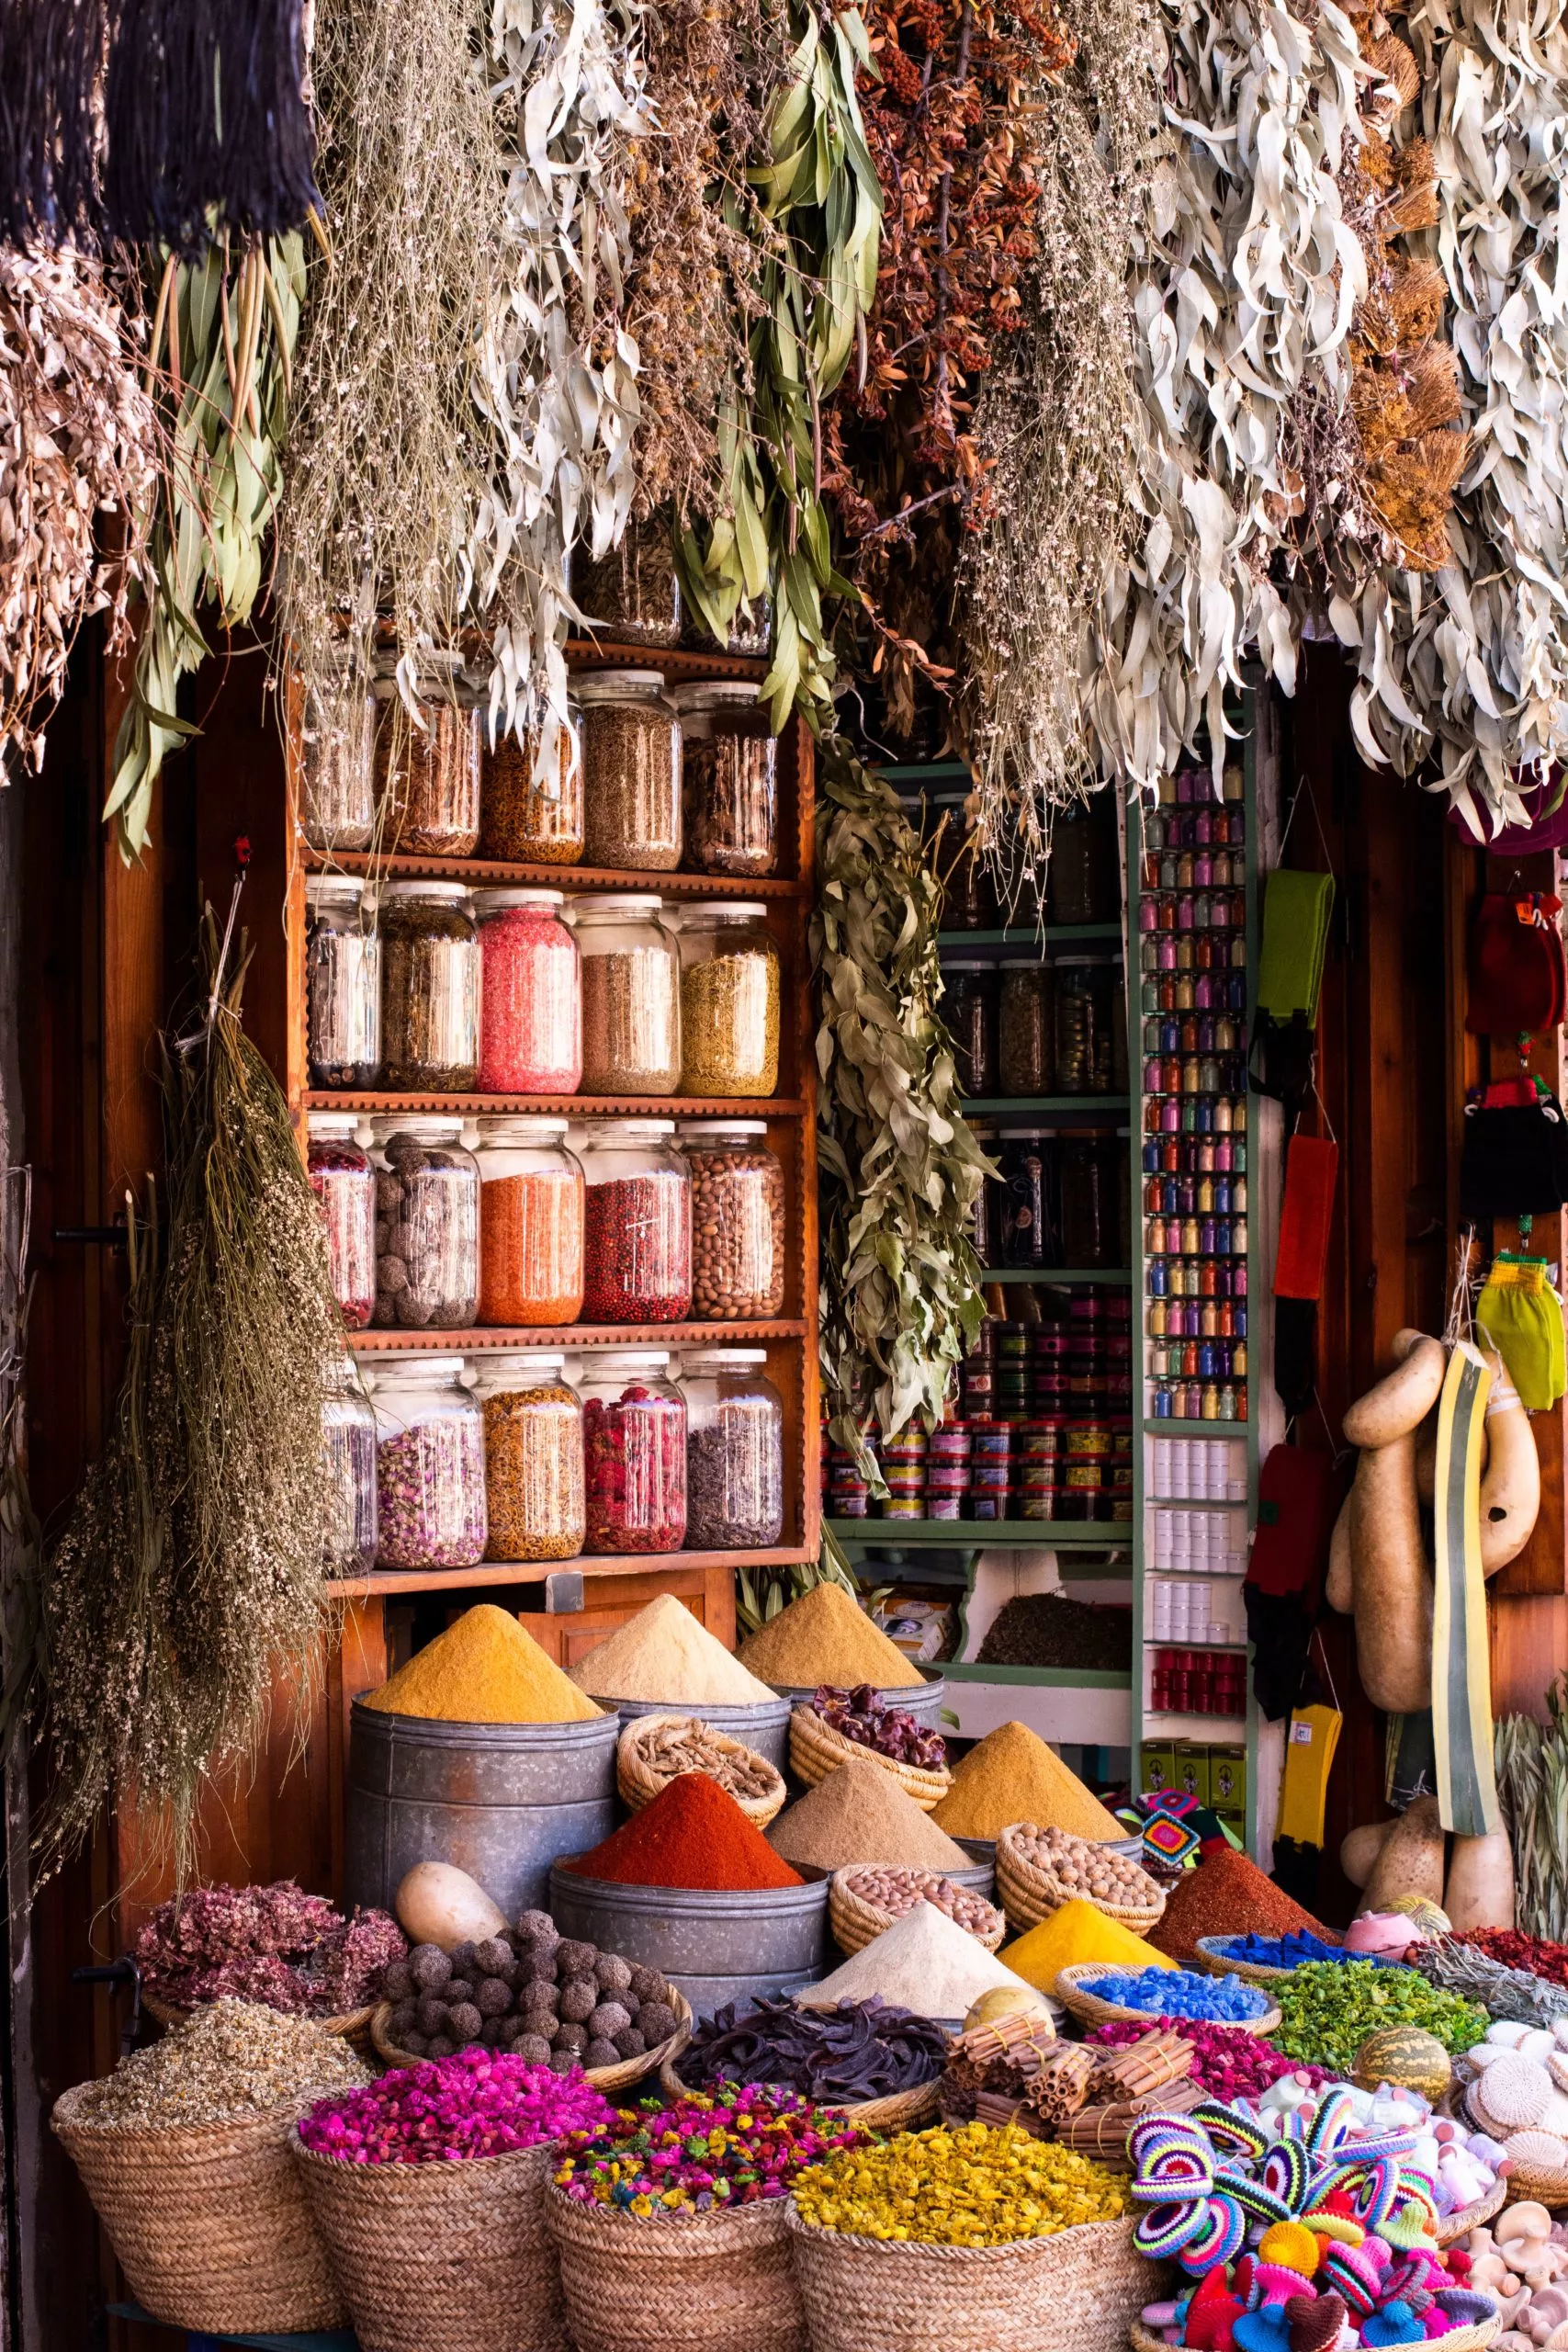 A spice market with various different spices in baskets and jars